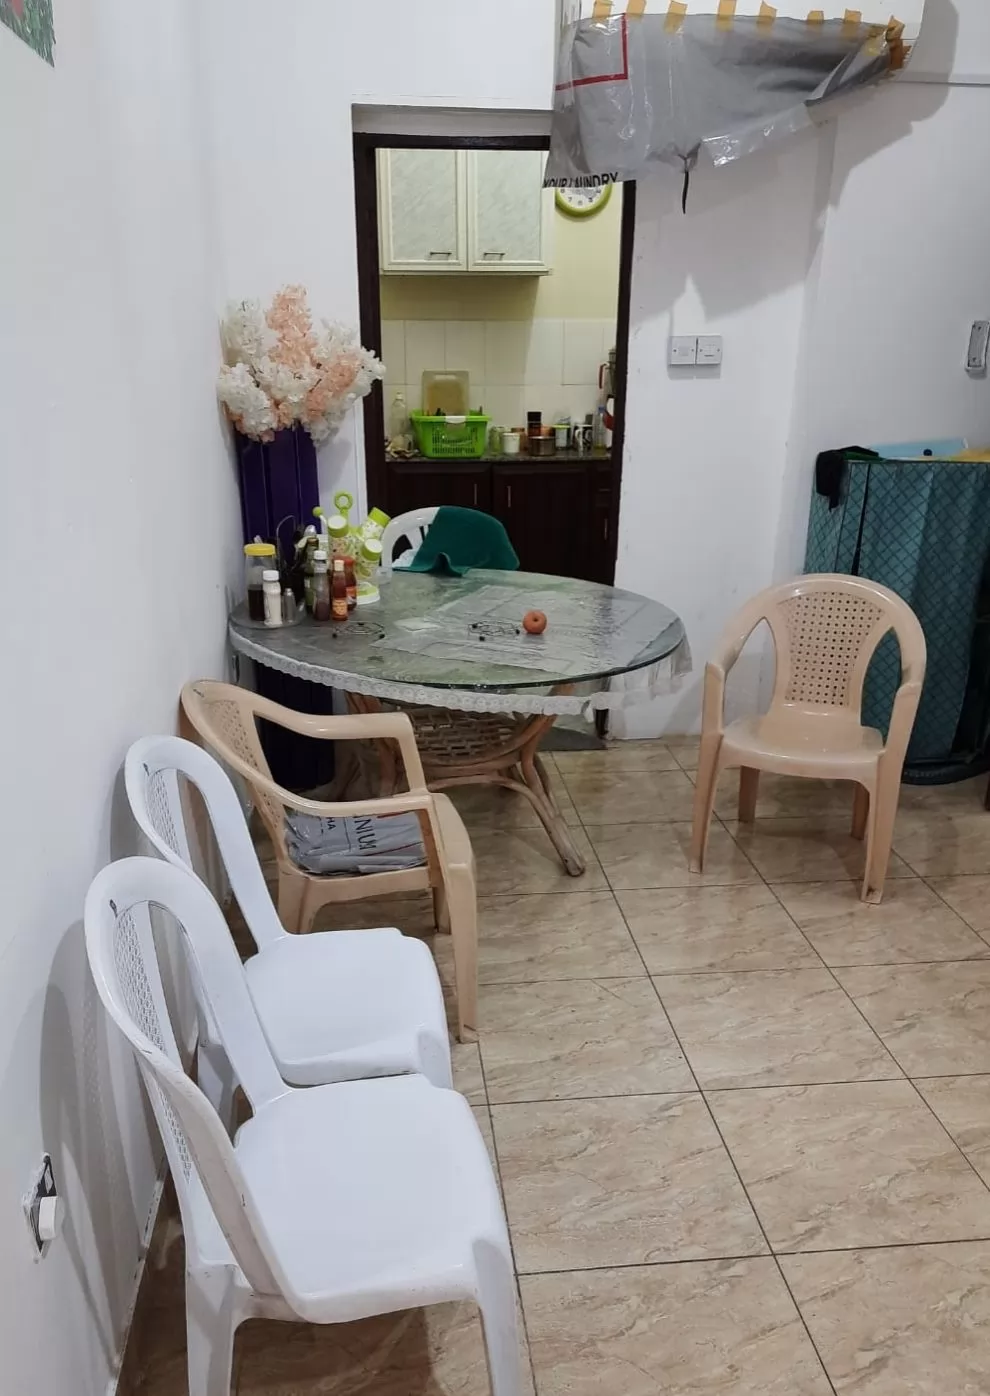 Residential Property 1 Bedroom F/F Apartment  for rent in Al-Hilal , Doha-Qatar #16843 - 1  image 